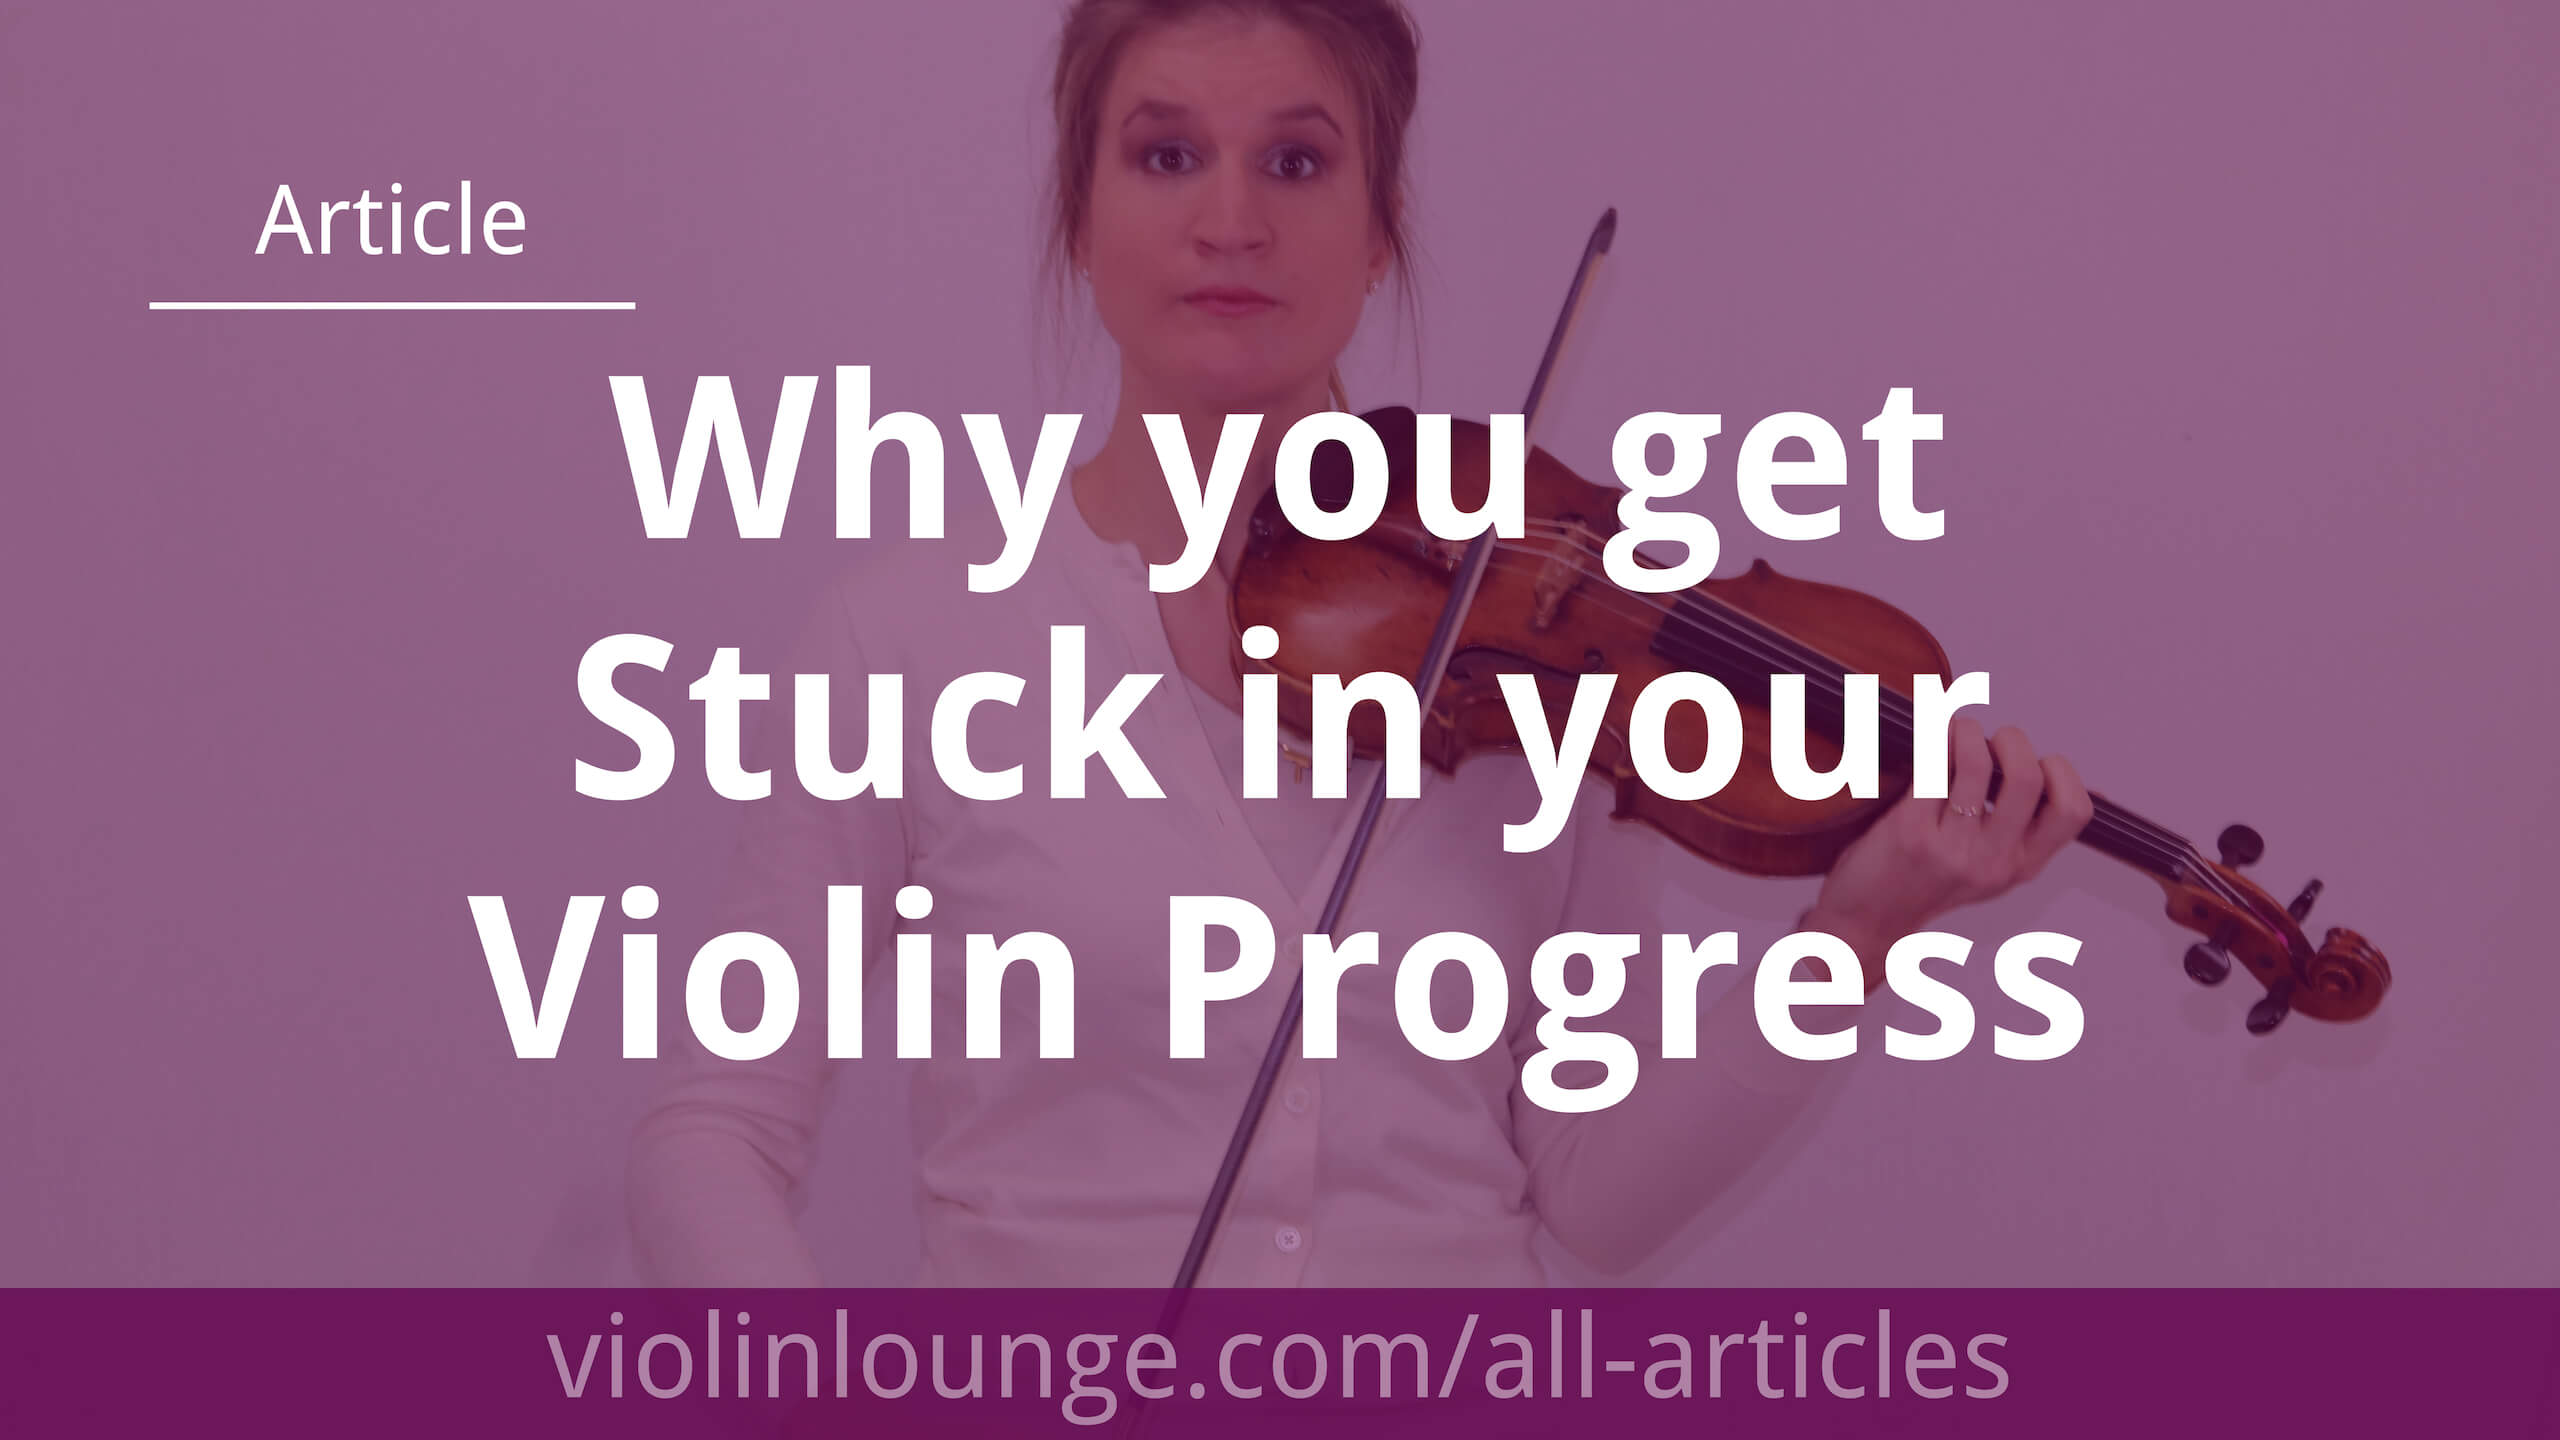 Why you get Stuck in your Progress - Violin Lounge